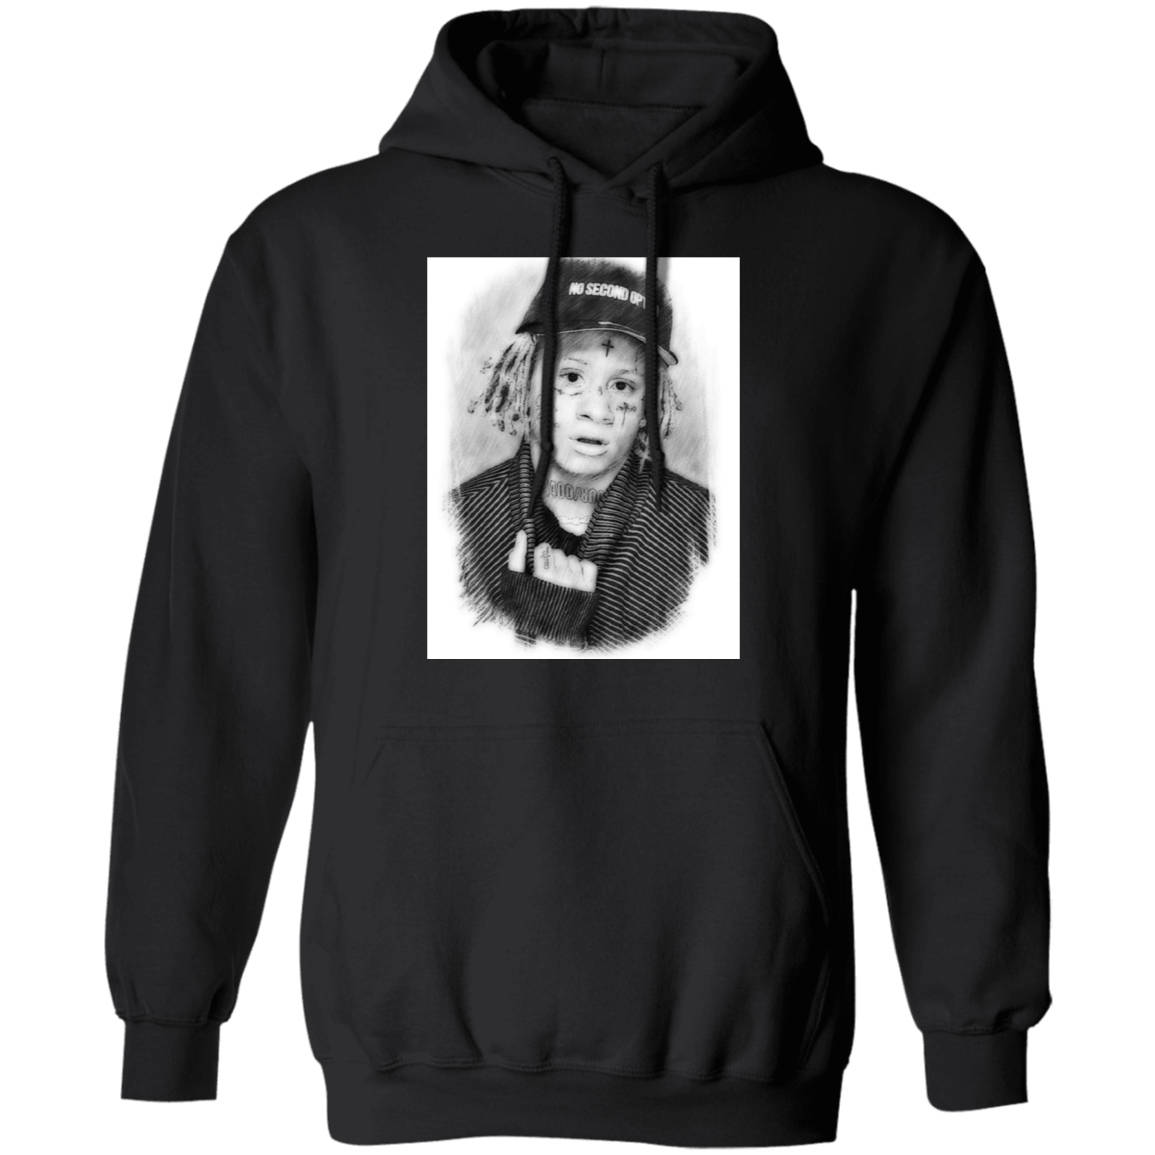 trippie redd is on the front of a black hoodie